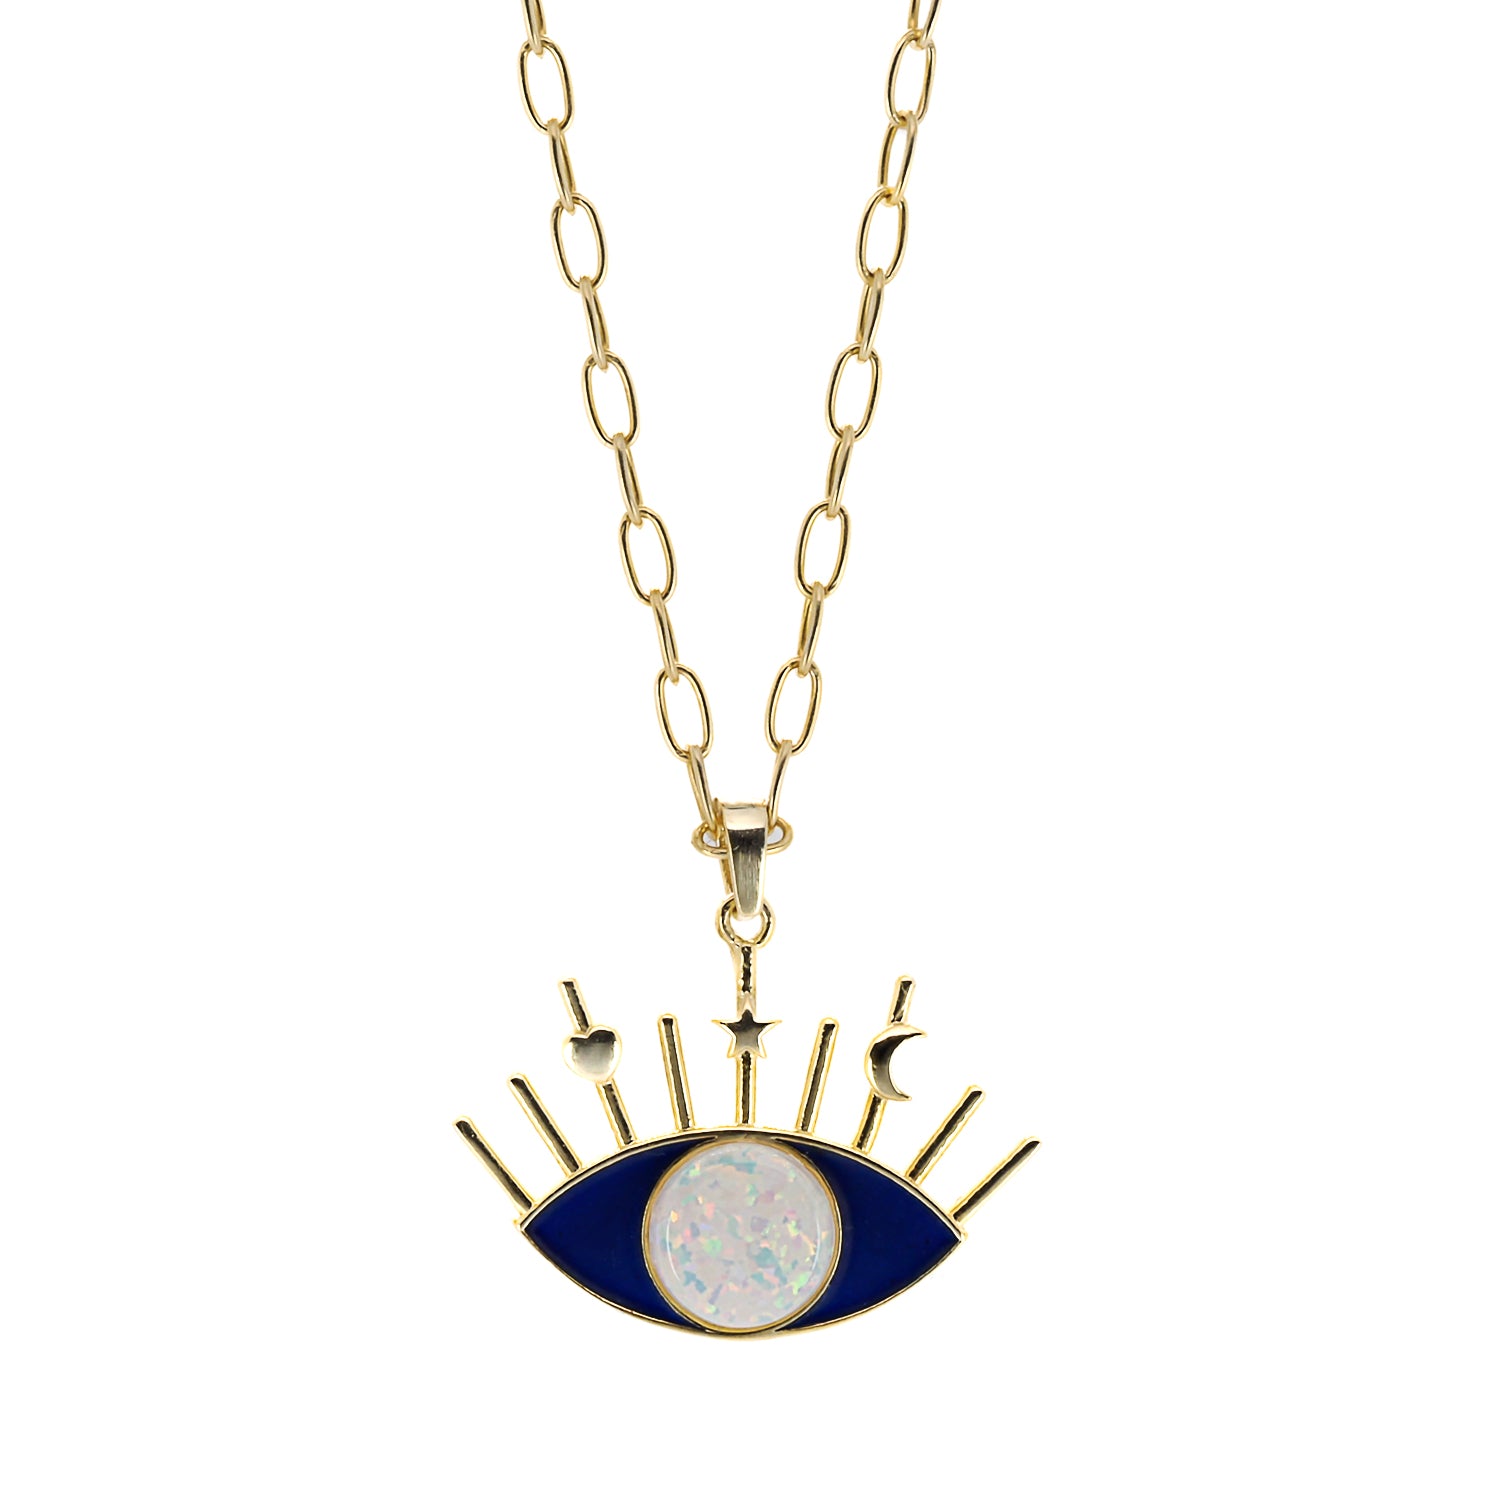 A close-up of the enchanting combination of blue enamel and white opal on the Evil Eye pendant.